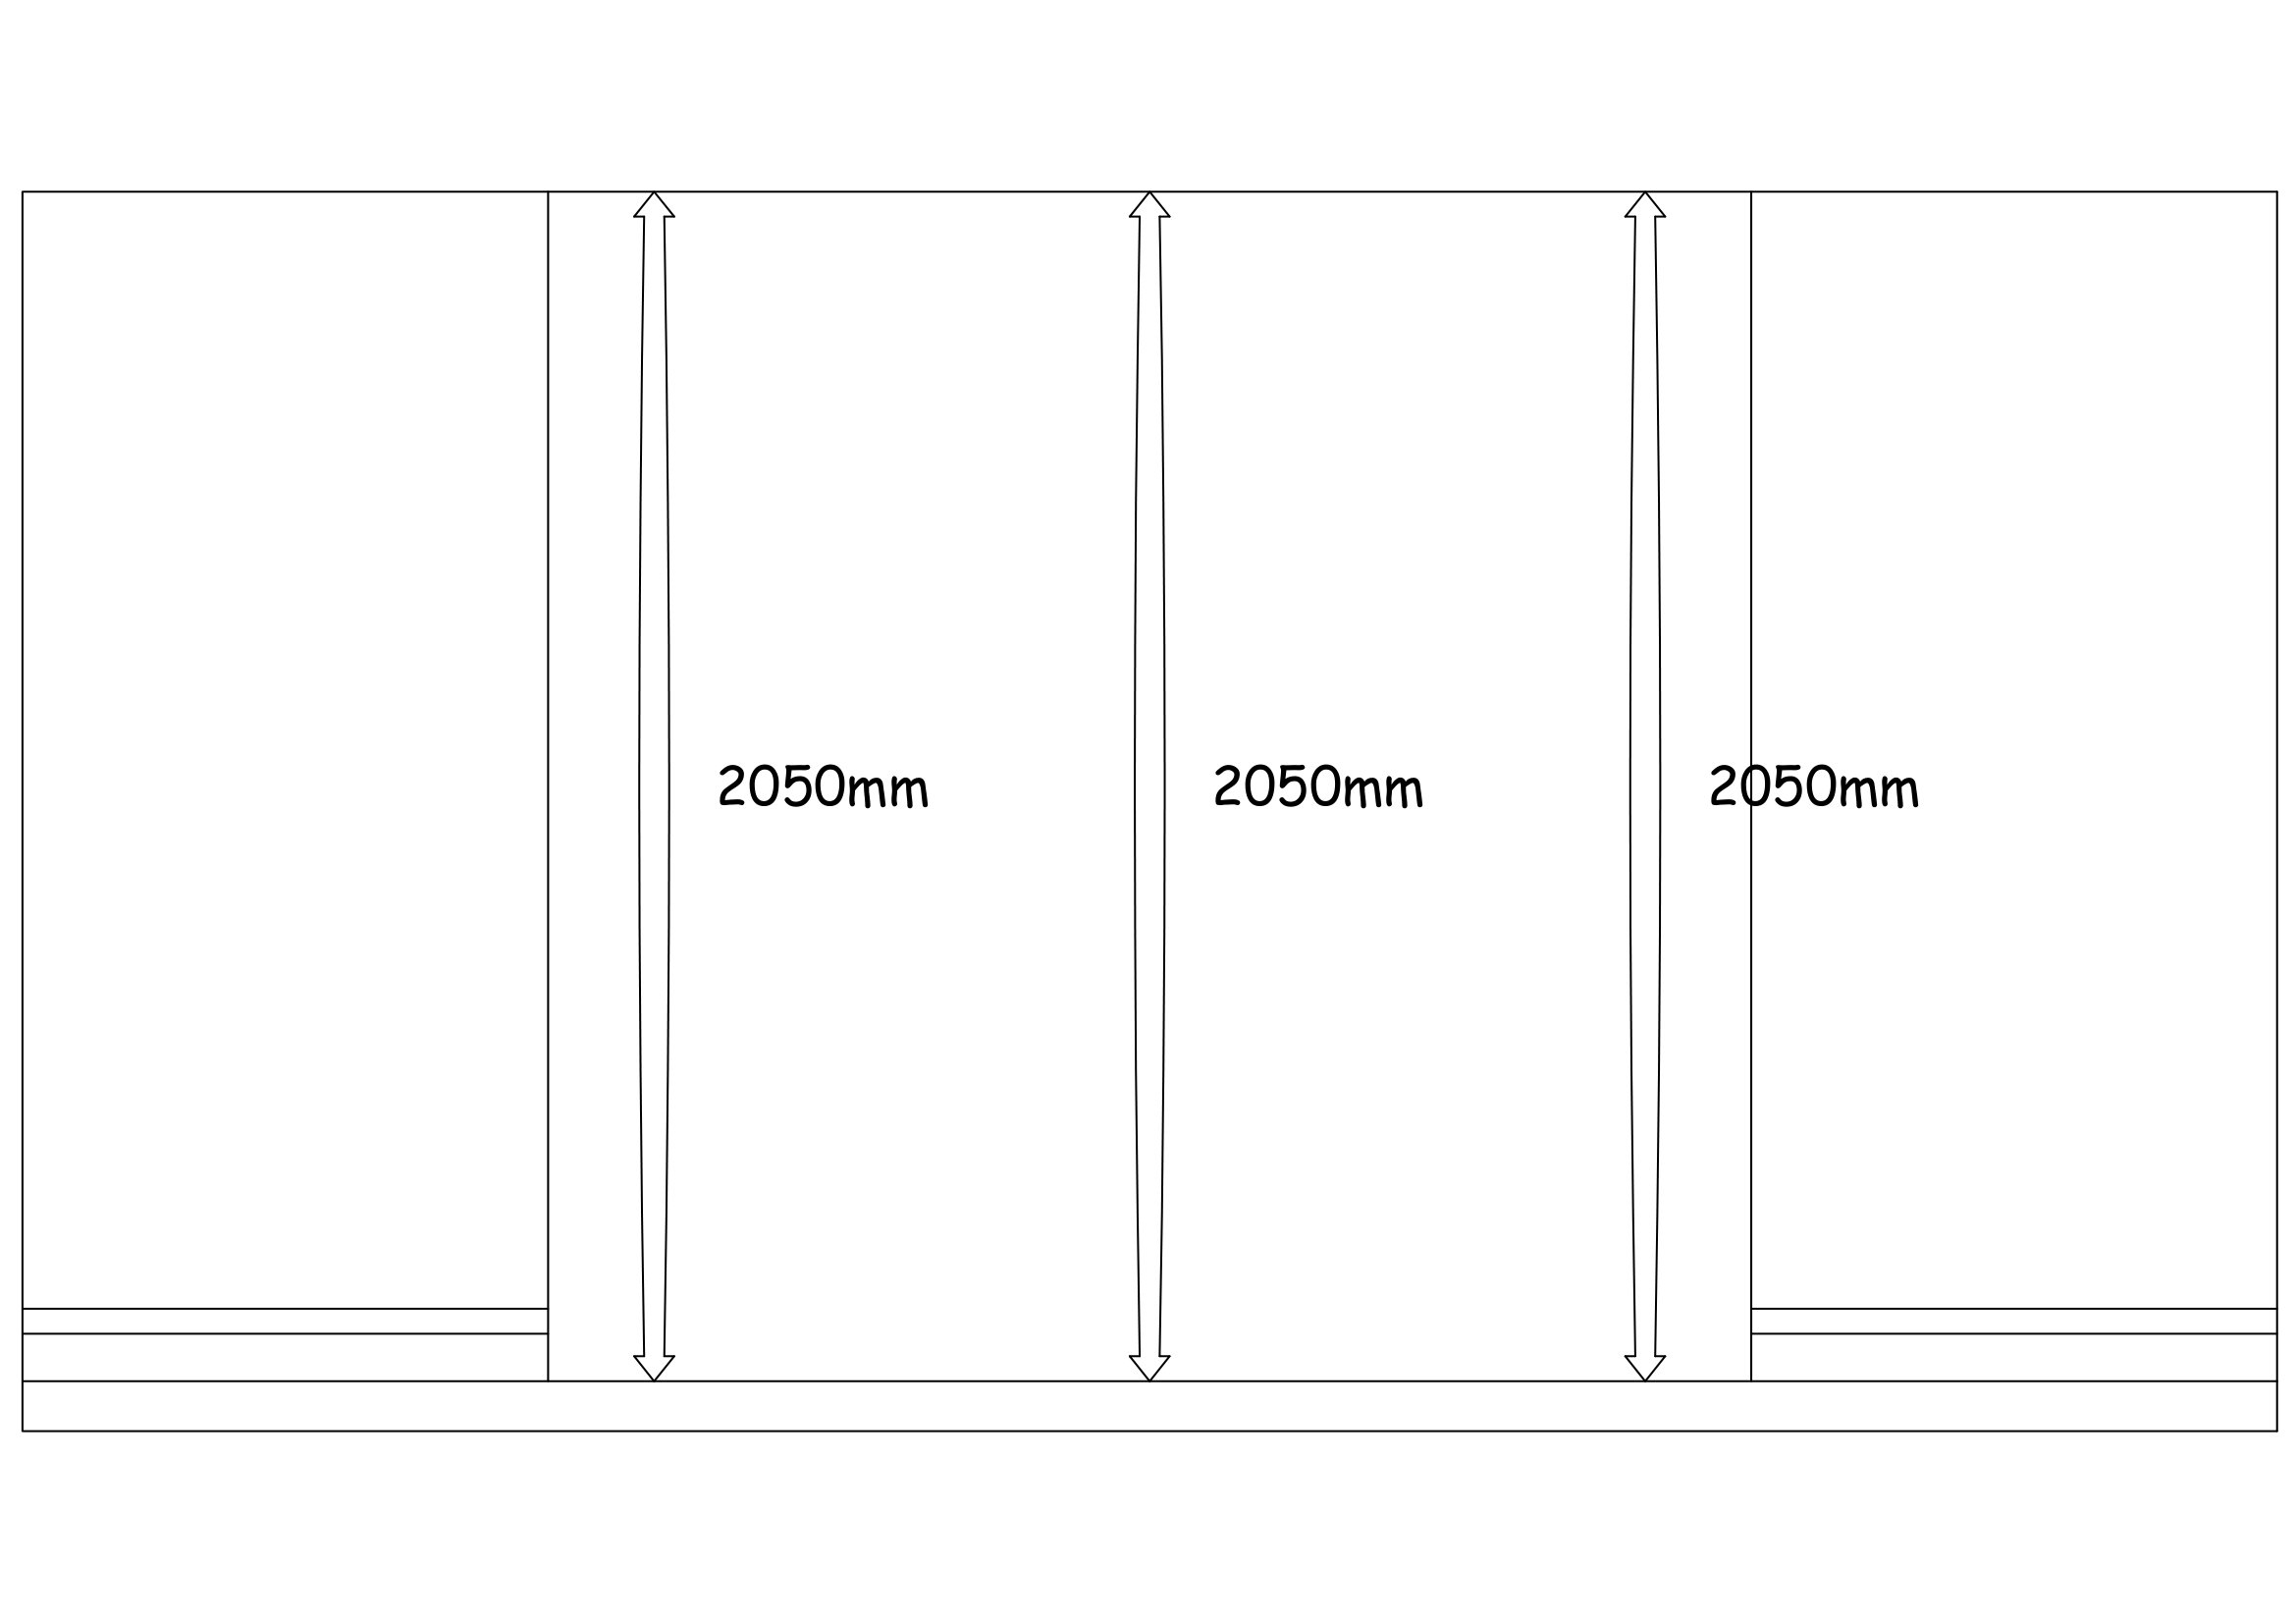 14 - How to Measure for a Wardrobe Opening for New Sliding Door Wardrobe #3.jpg